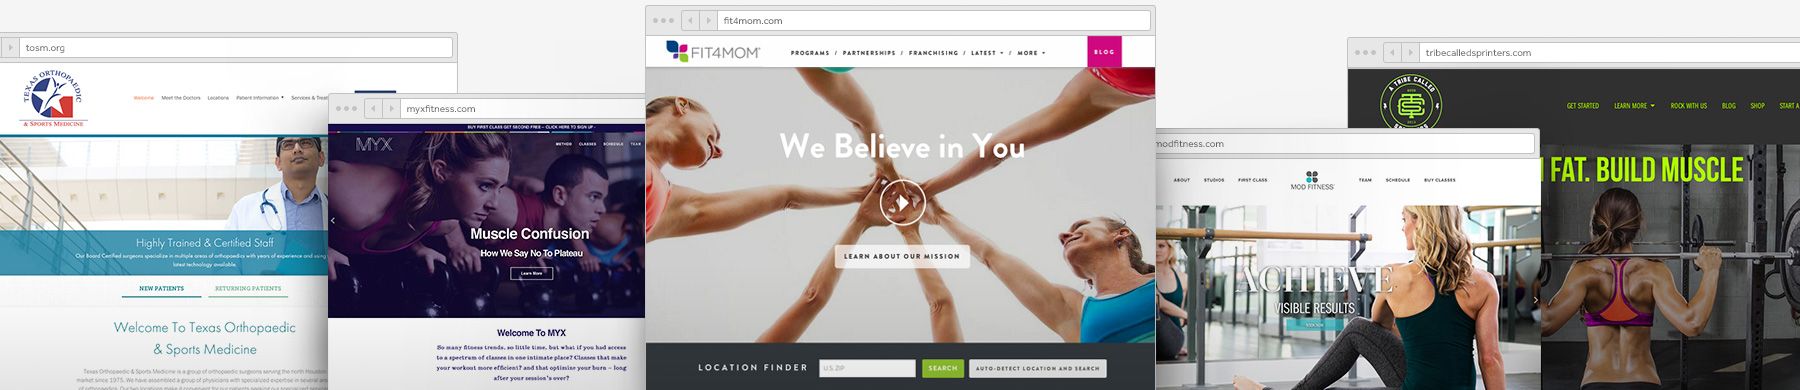 Health and Fitness Website Customer Examples